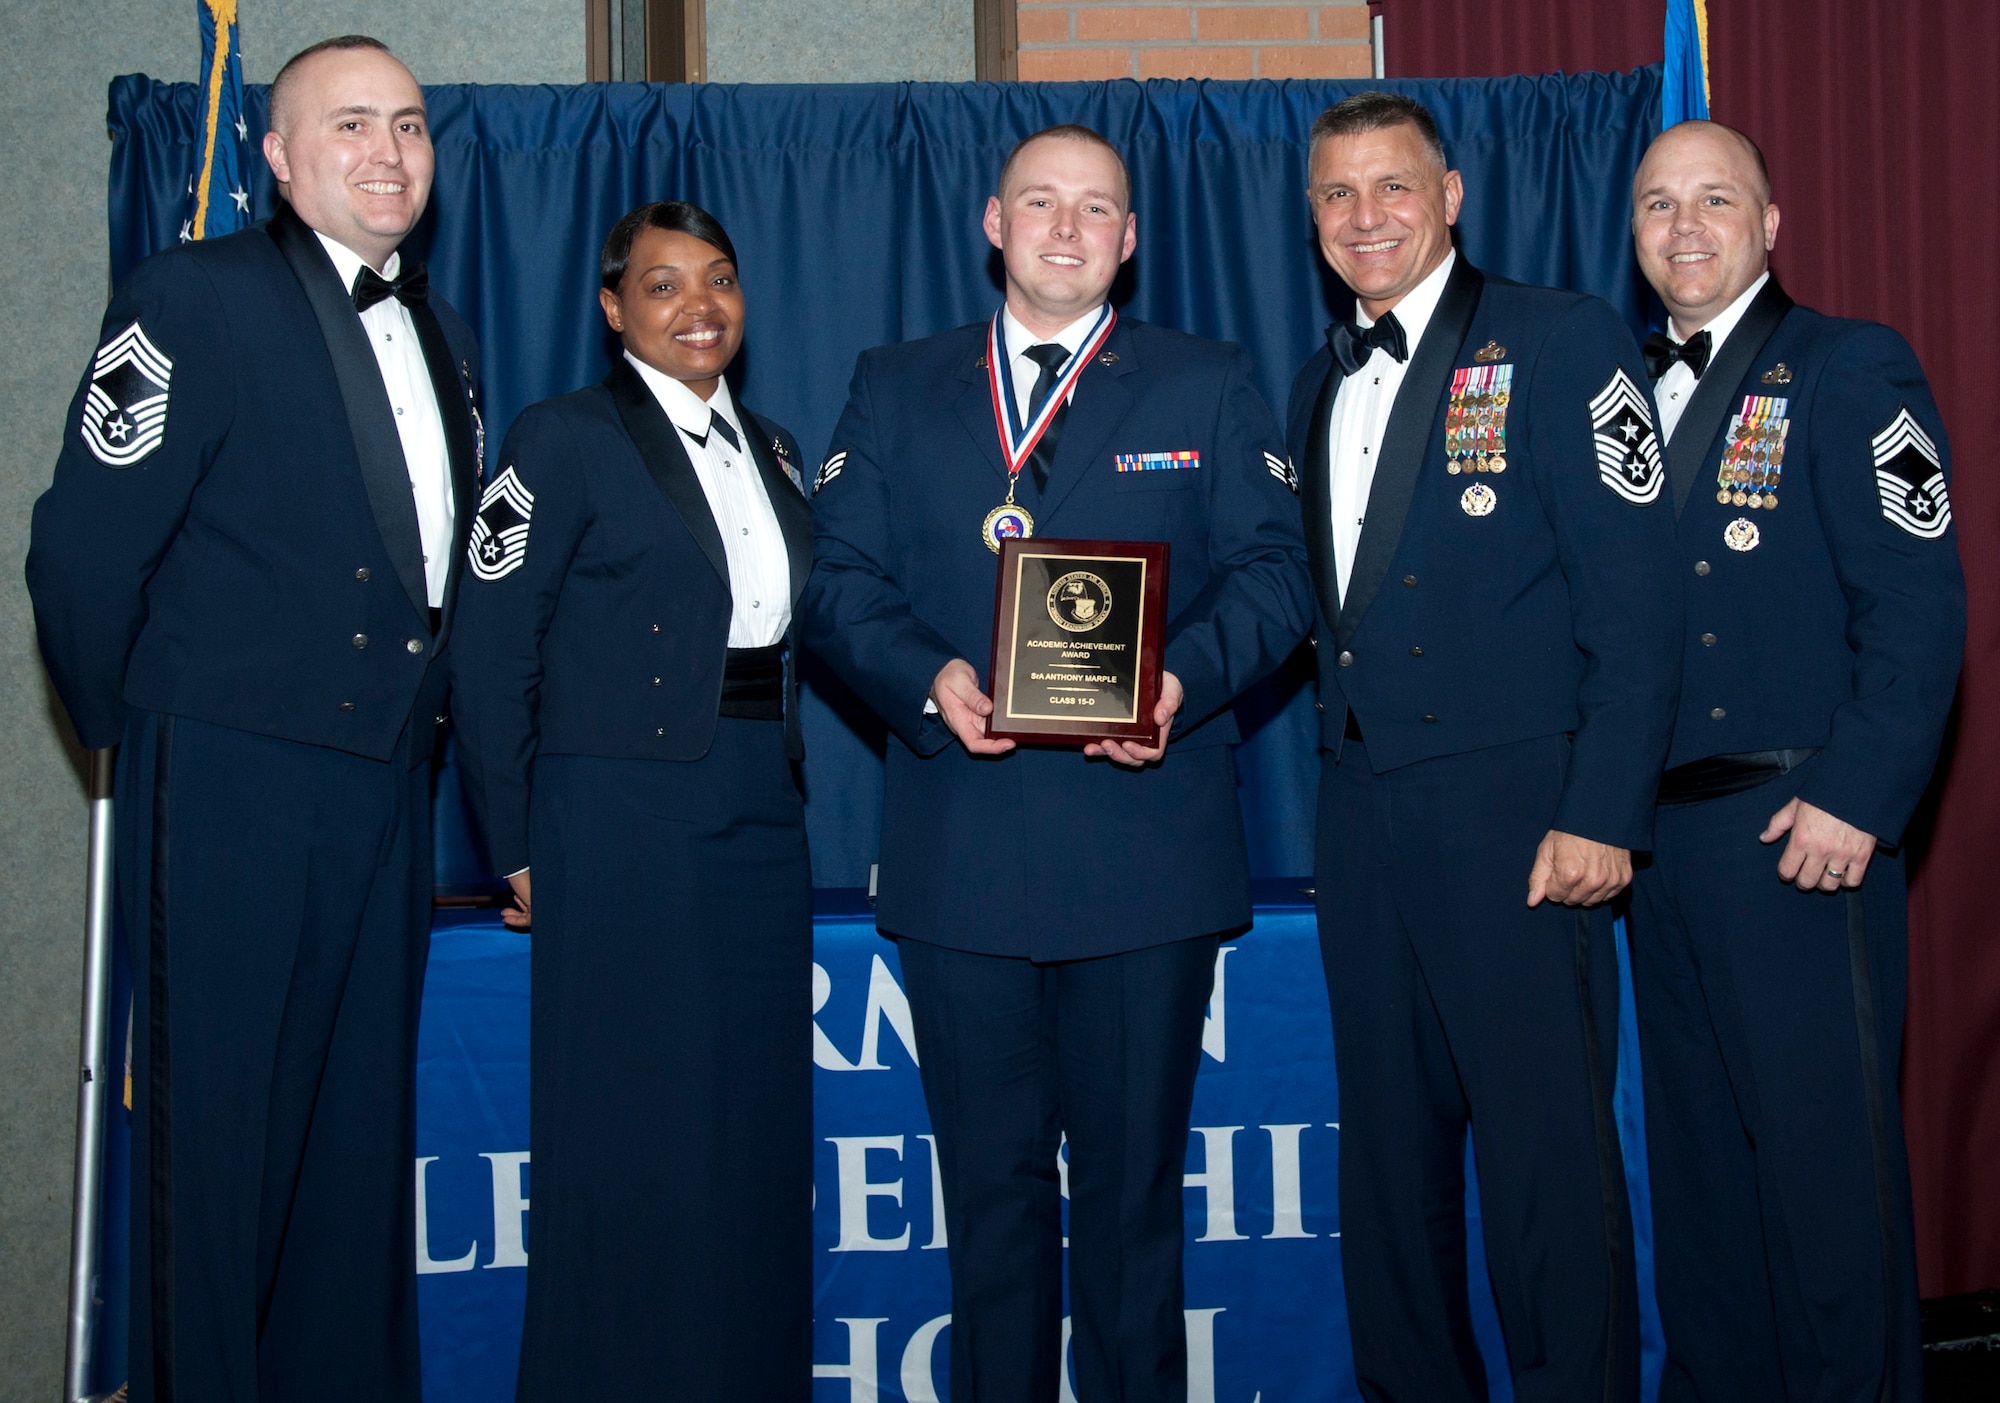 Senior Airman Anthony Marple, from the 71st Operation Support Squadron receives the Academic Award from members of the Vance Chief’s Group March 25 during the first-ever Airman Leadership School graduation at Vance in the Vance Collocated Club. Representing the Chief’s Group were (left to right) Chief Master Sgt. Bruce McPherson, 71st Security Forces Squadron, Chief Master Sgt. Melvina Smith, 71st Mission Support Group, Command Chief Master Sgt. Peter Speen, the 71st Flying Training Wing command chief, and Chief Master Sgt. Kraig Chapman, 71st OSS. (U.S. Air Force photo\ 2nd Lt. Isabel Crump)